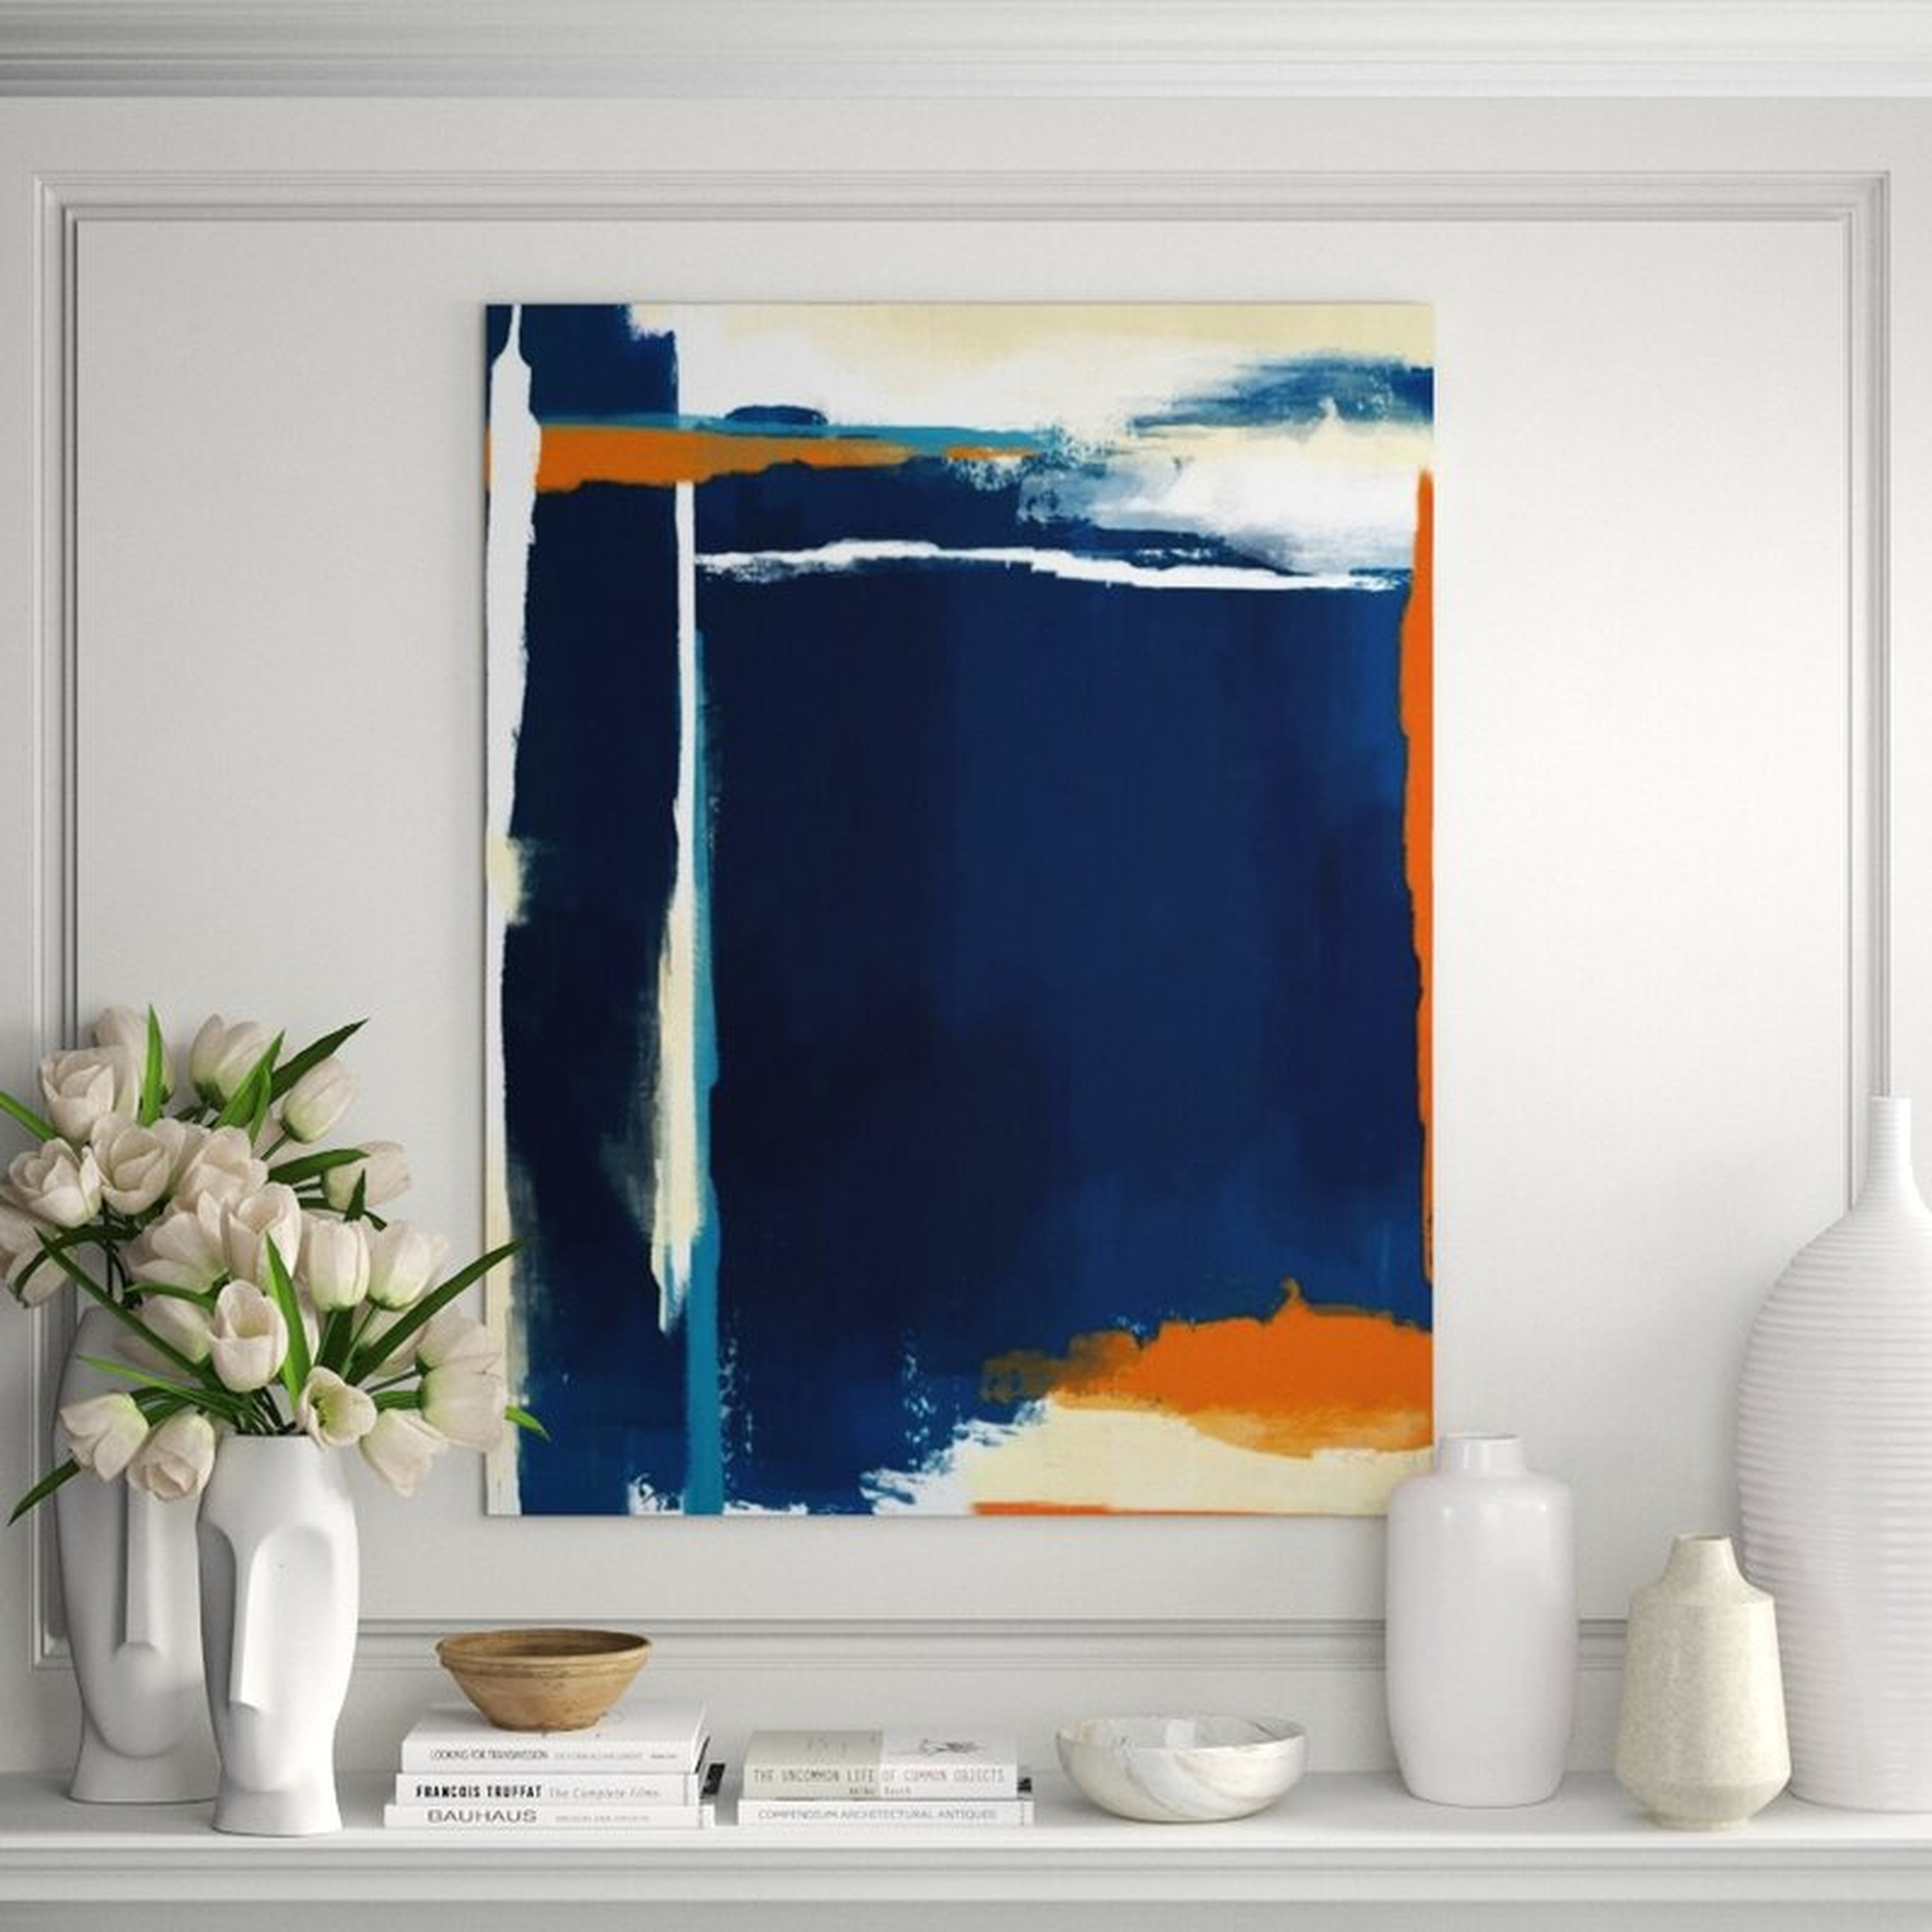 Chelsea Art Studio Composition of Blue and Orange III by Sofia Fox - Painting Print - Perigold